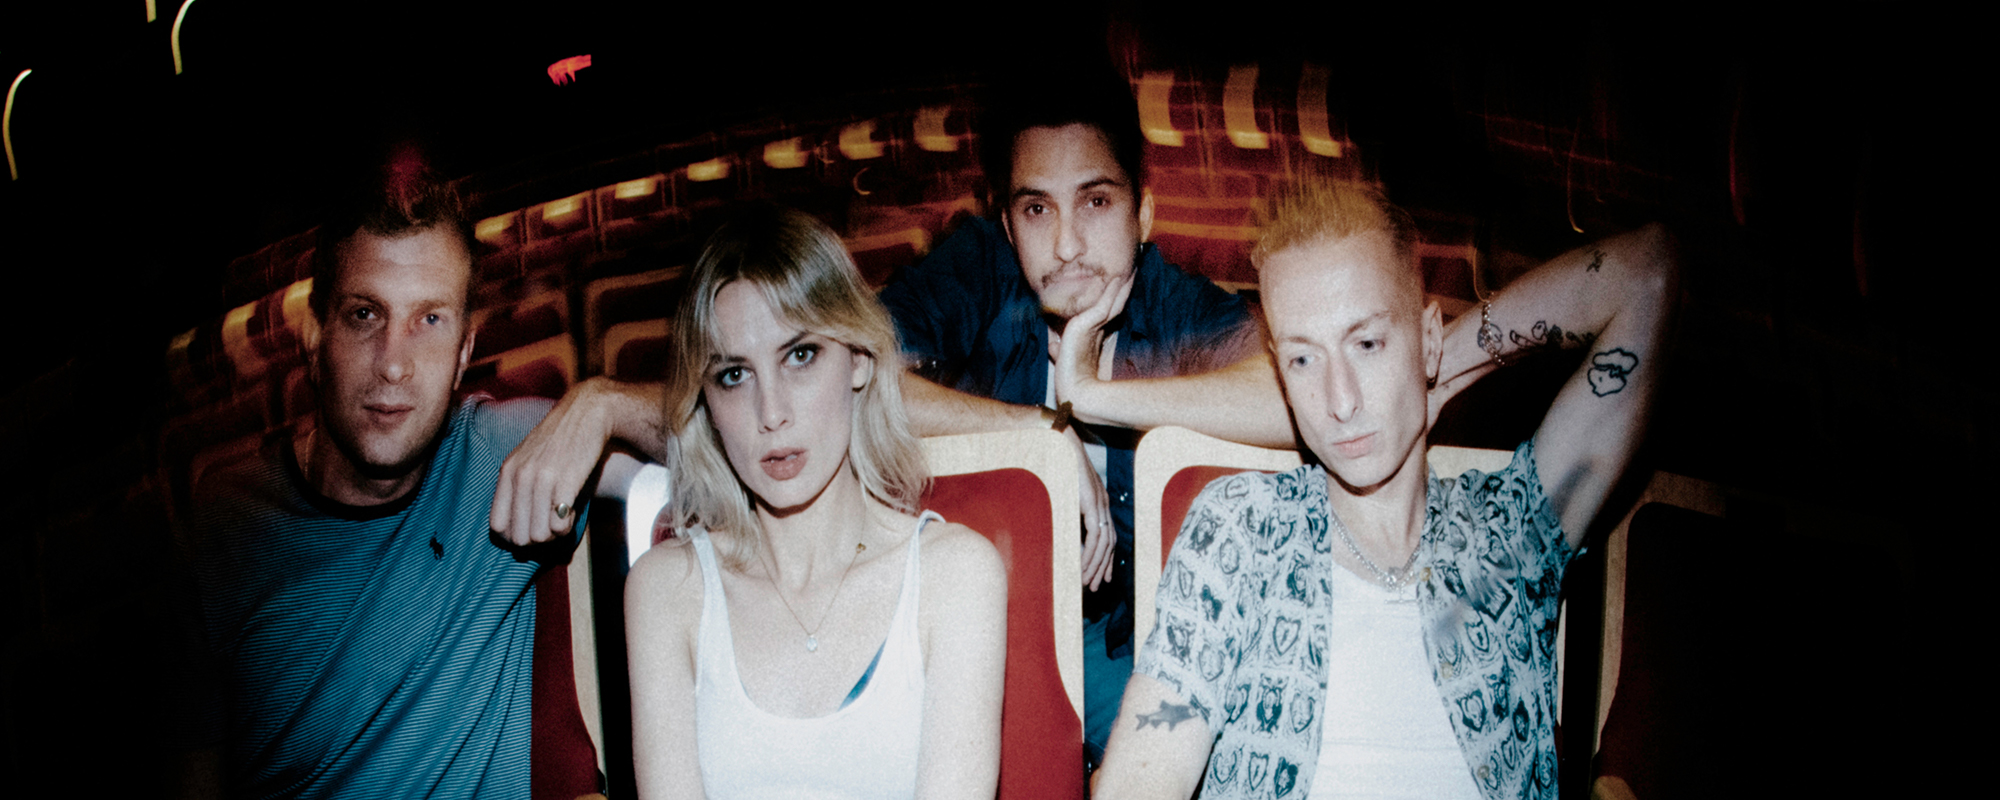 Wolf Alice Stuck in the U.S. After All Flights Out of L.A. Were Cancelled